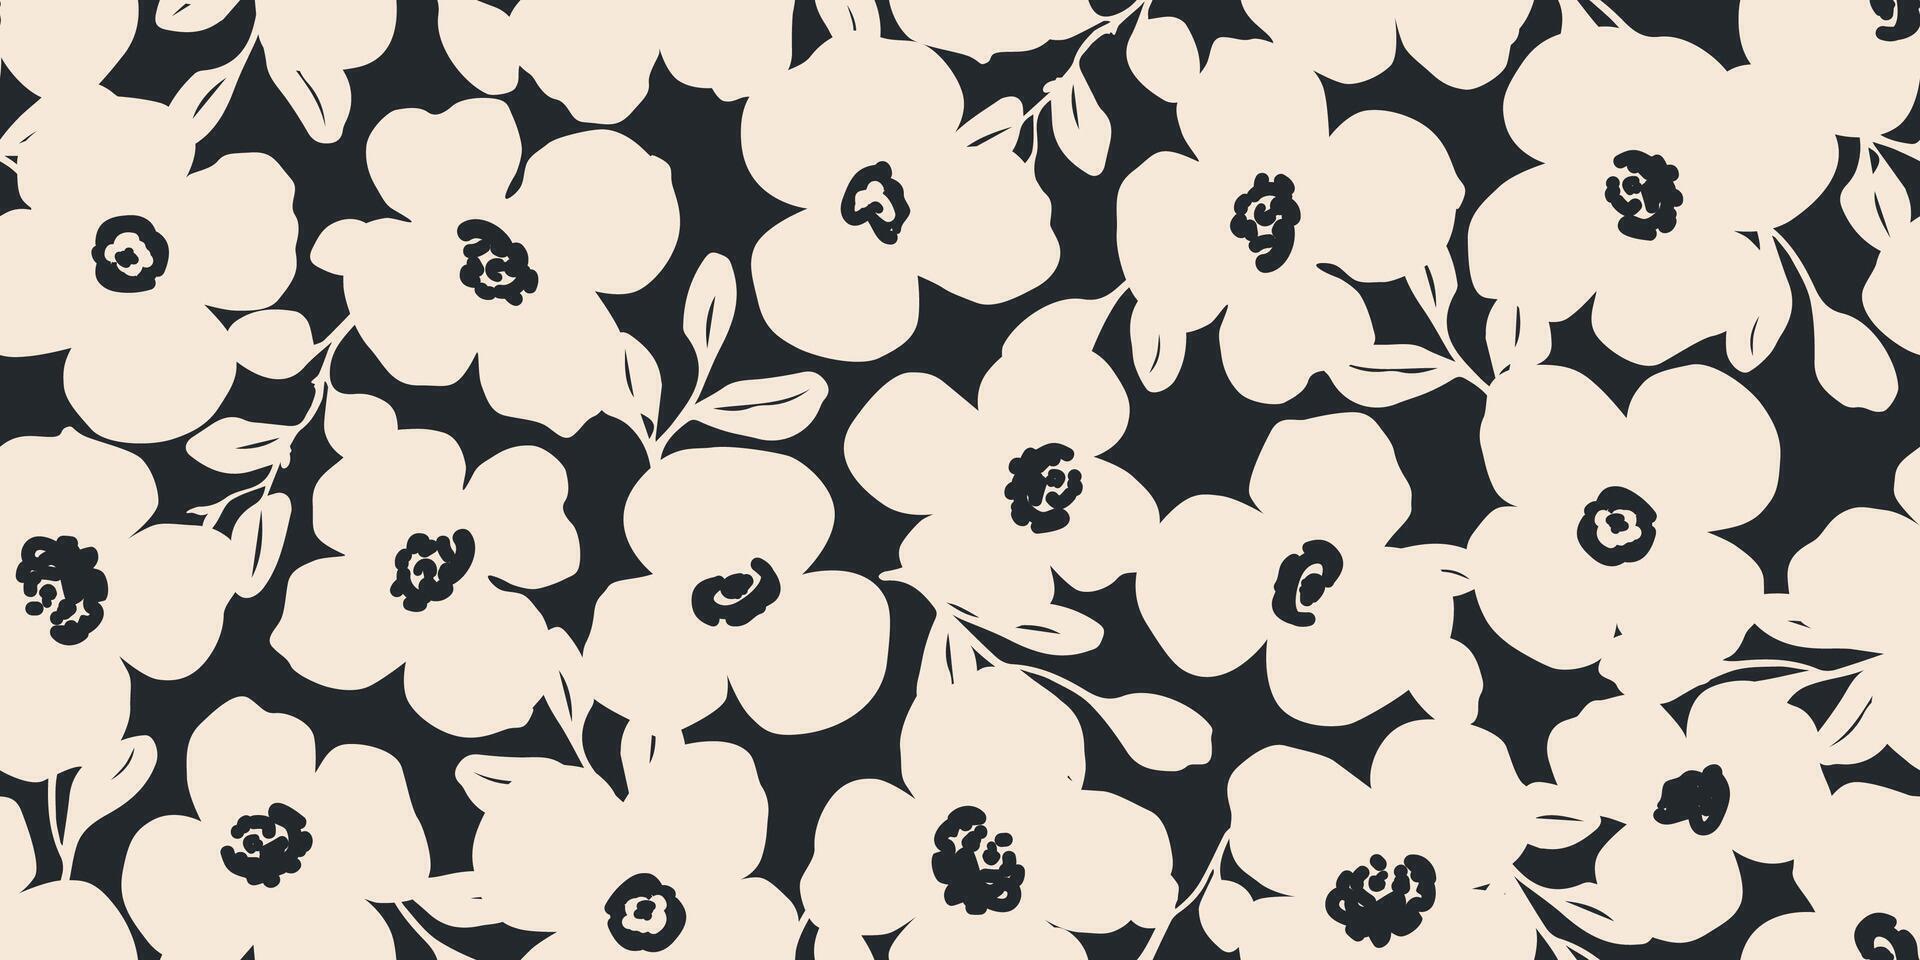 Flower seamless pattern . Organic shapes abstract floral background. Modern print in black and white colors for textile design, fabric, wallpaper, covers, cards, wall art, posters and decoration. vector